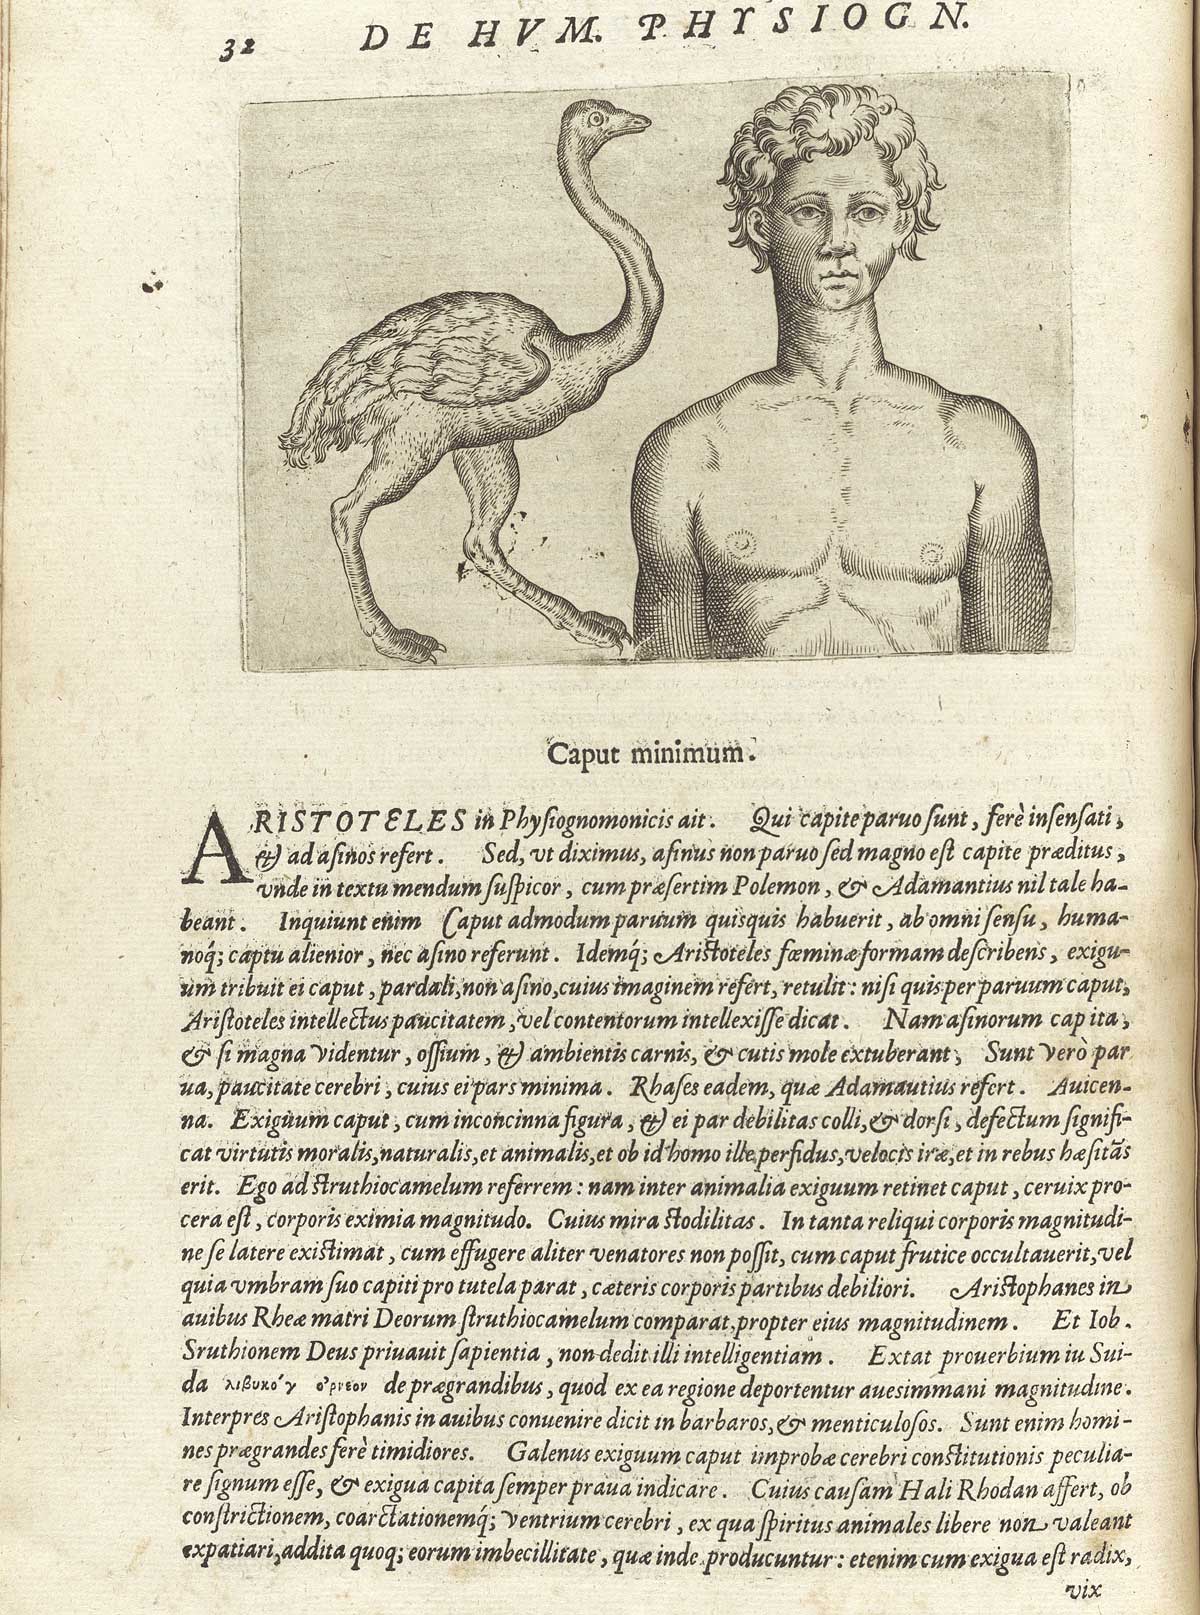 Page 32 of Giambattista della Porta's De humana physiognomonia libri IIII, featuring on the left an image of the full length right side view of an ostrich and on the right an image of the head and shoulders frontal view of a nude man with an elongated neck.